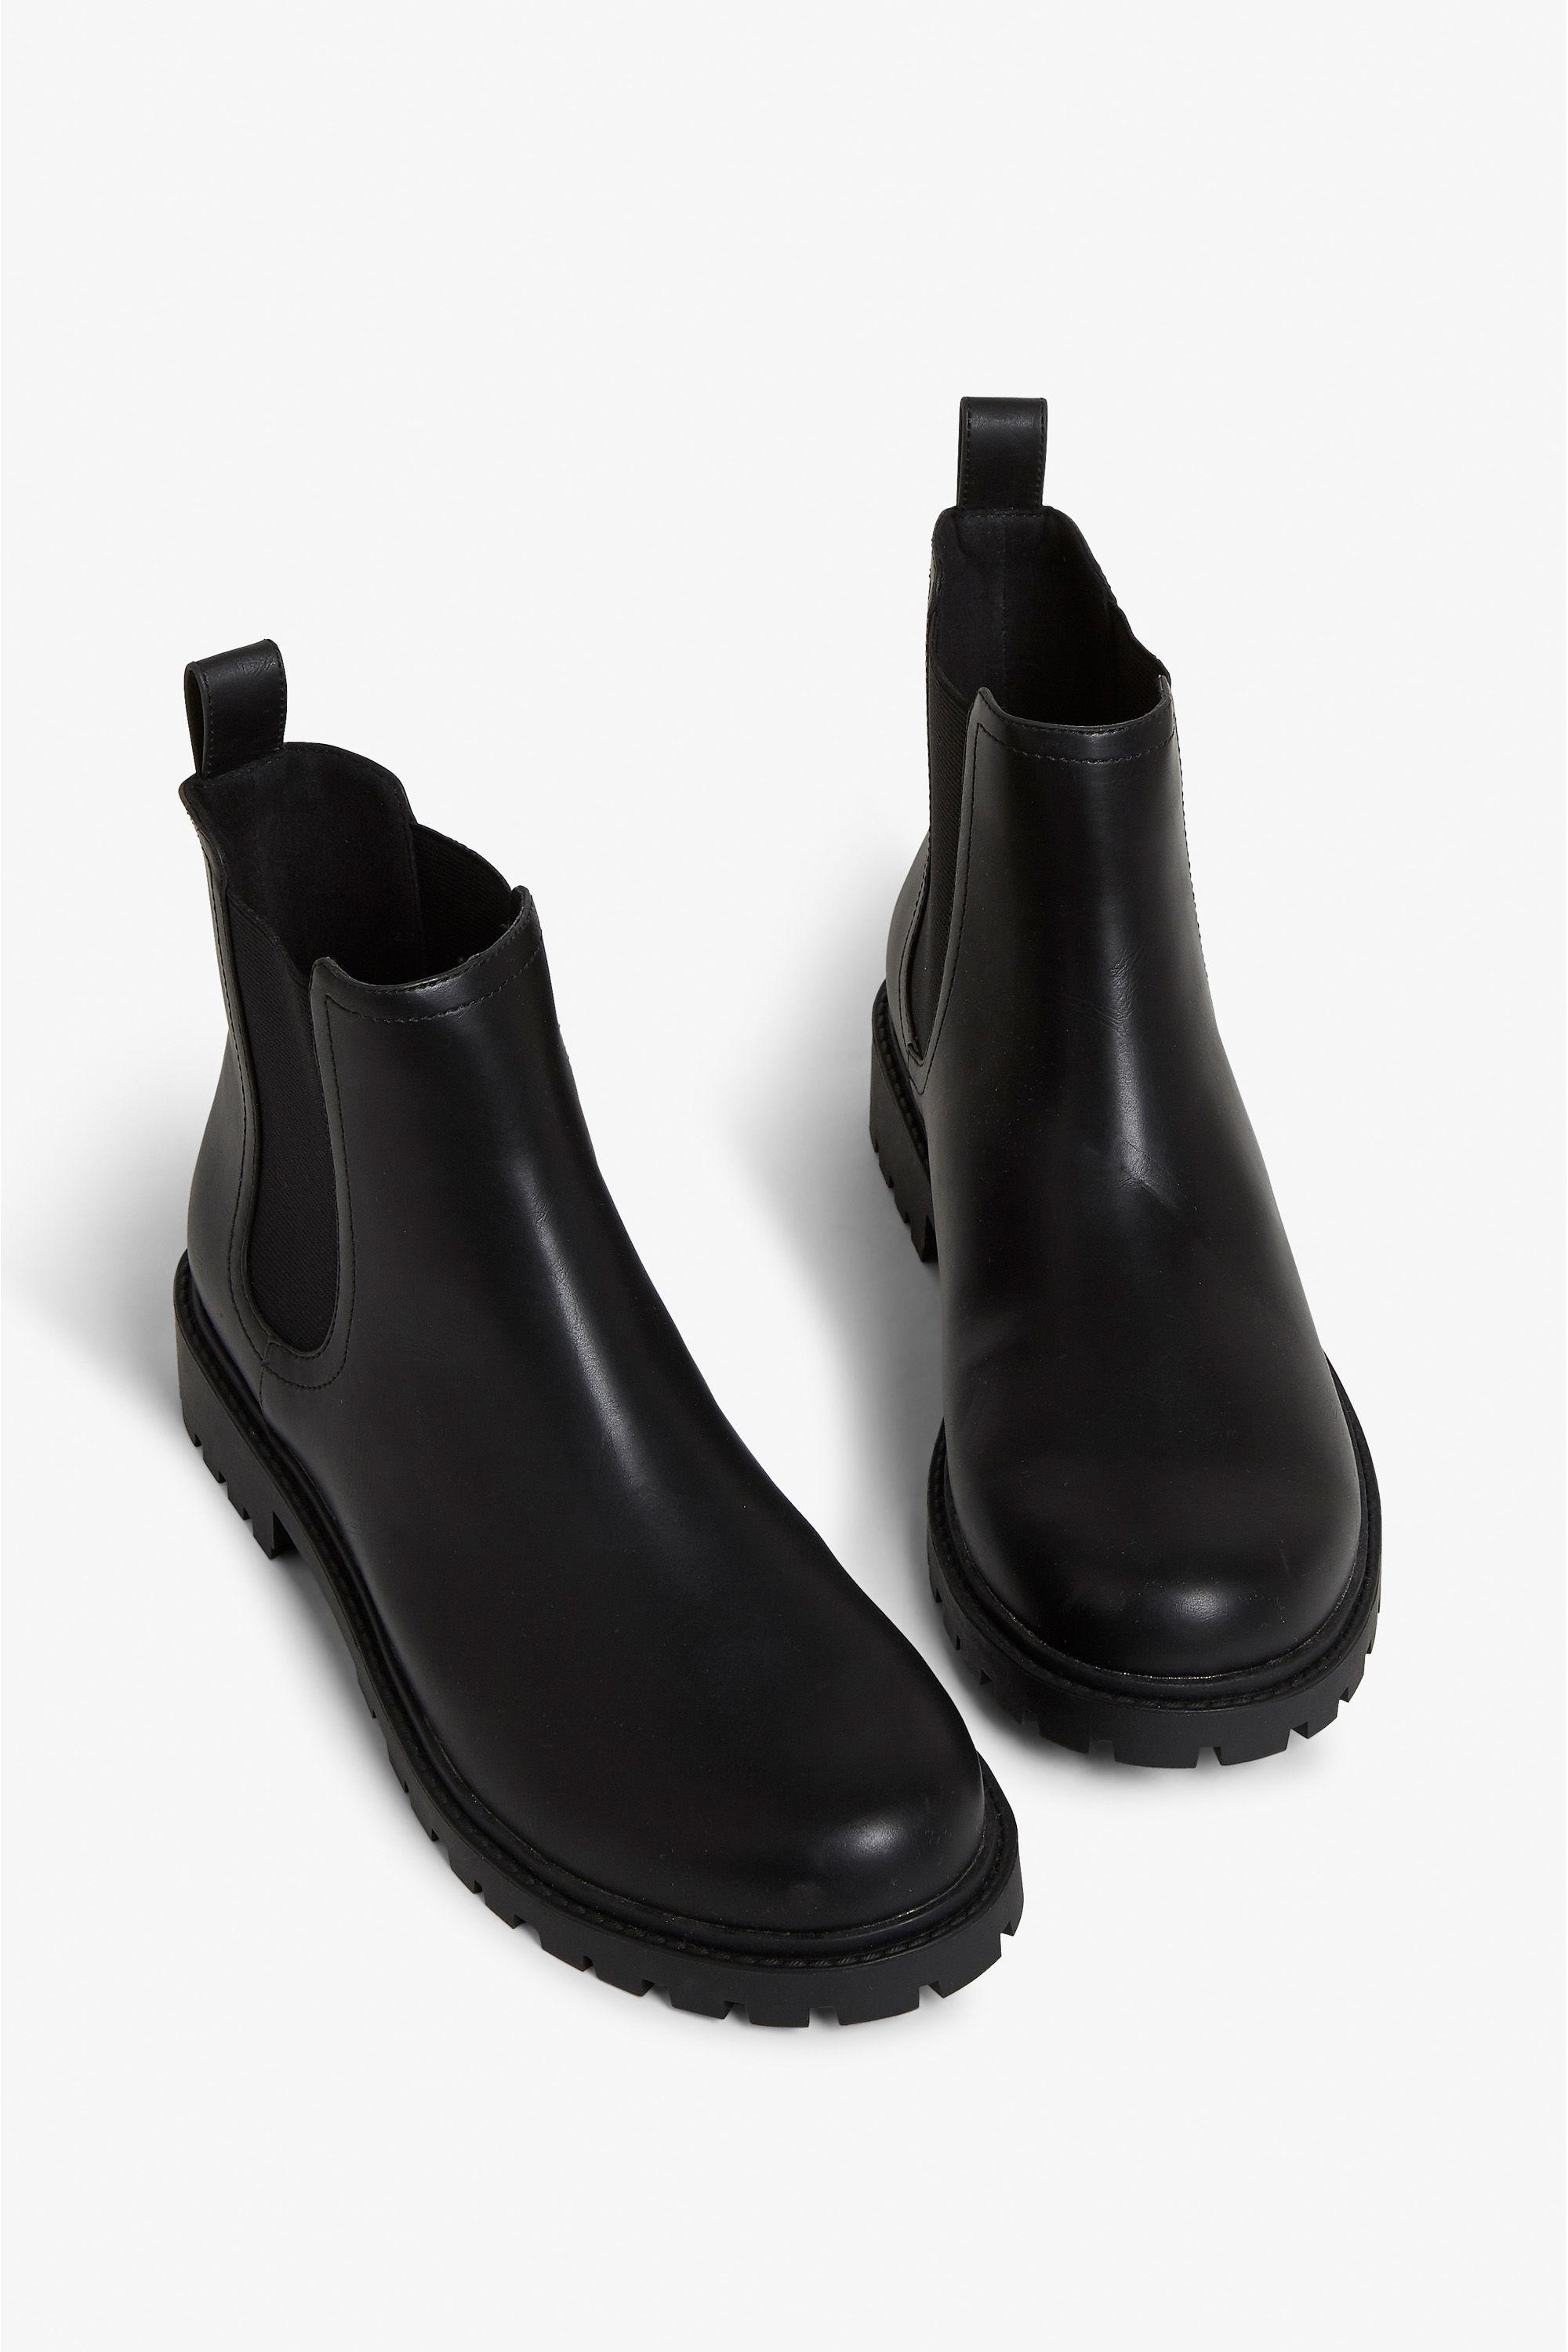 buy \u003e monki chunky chelsea boots, Up to 